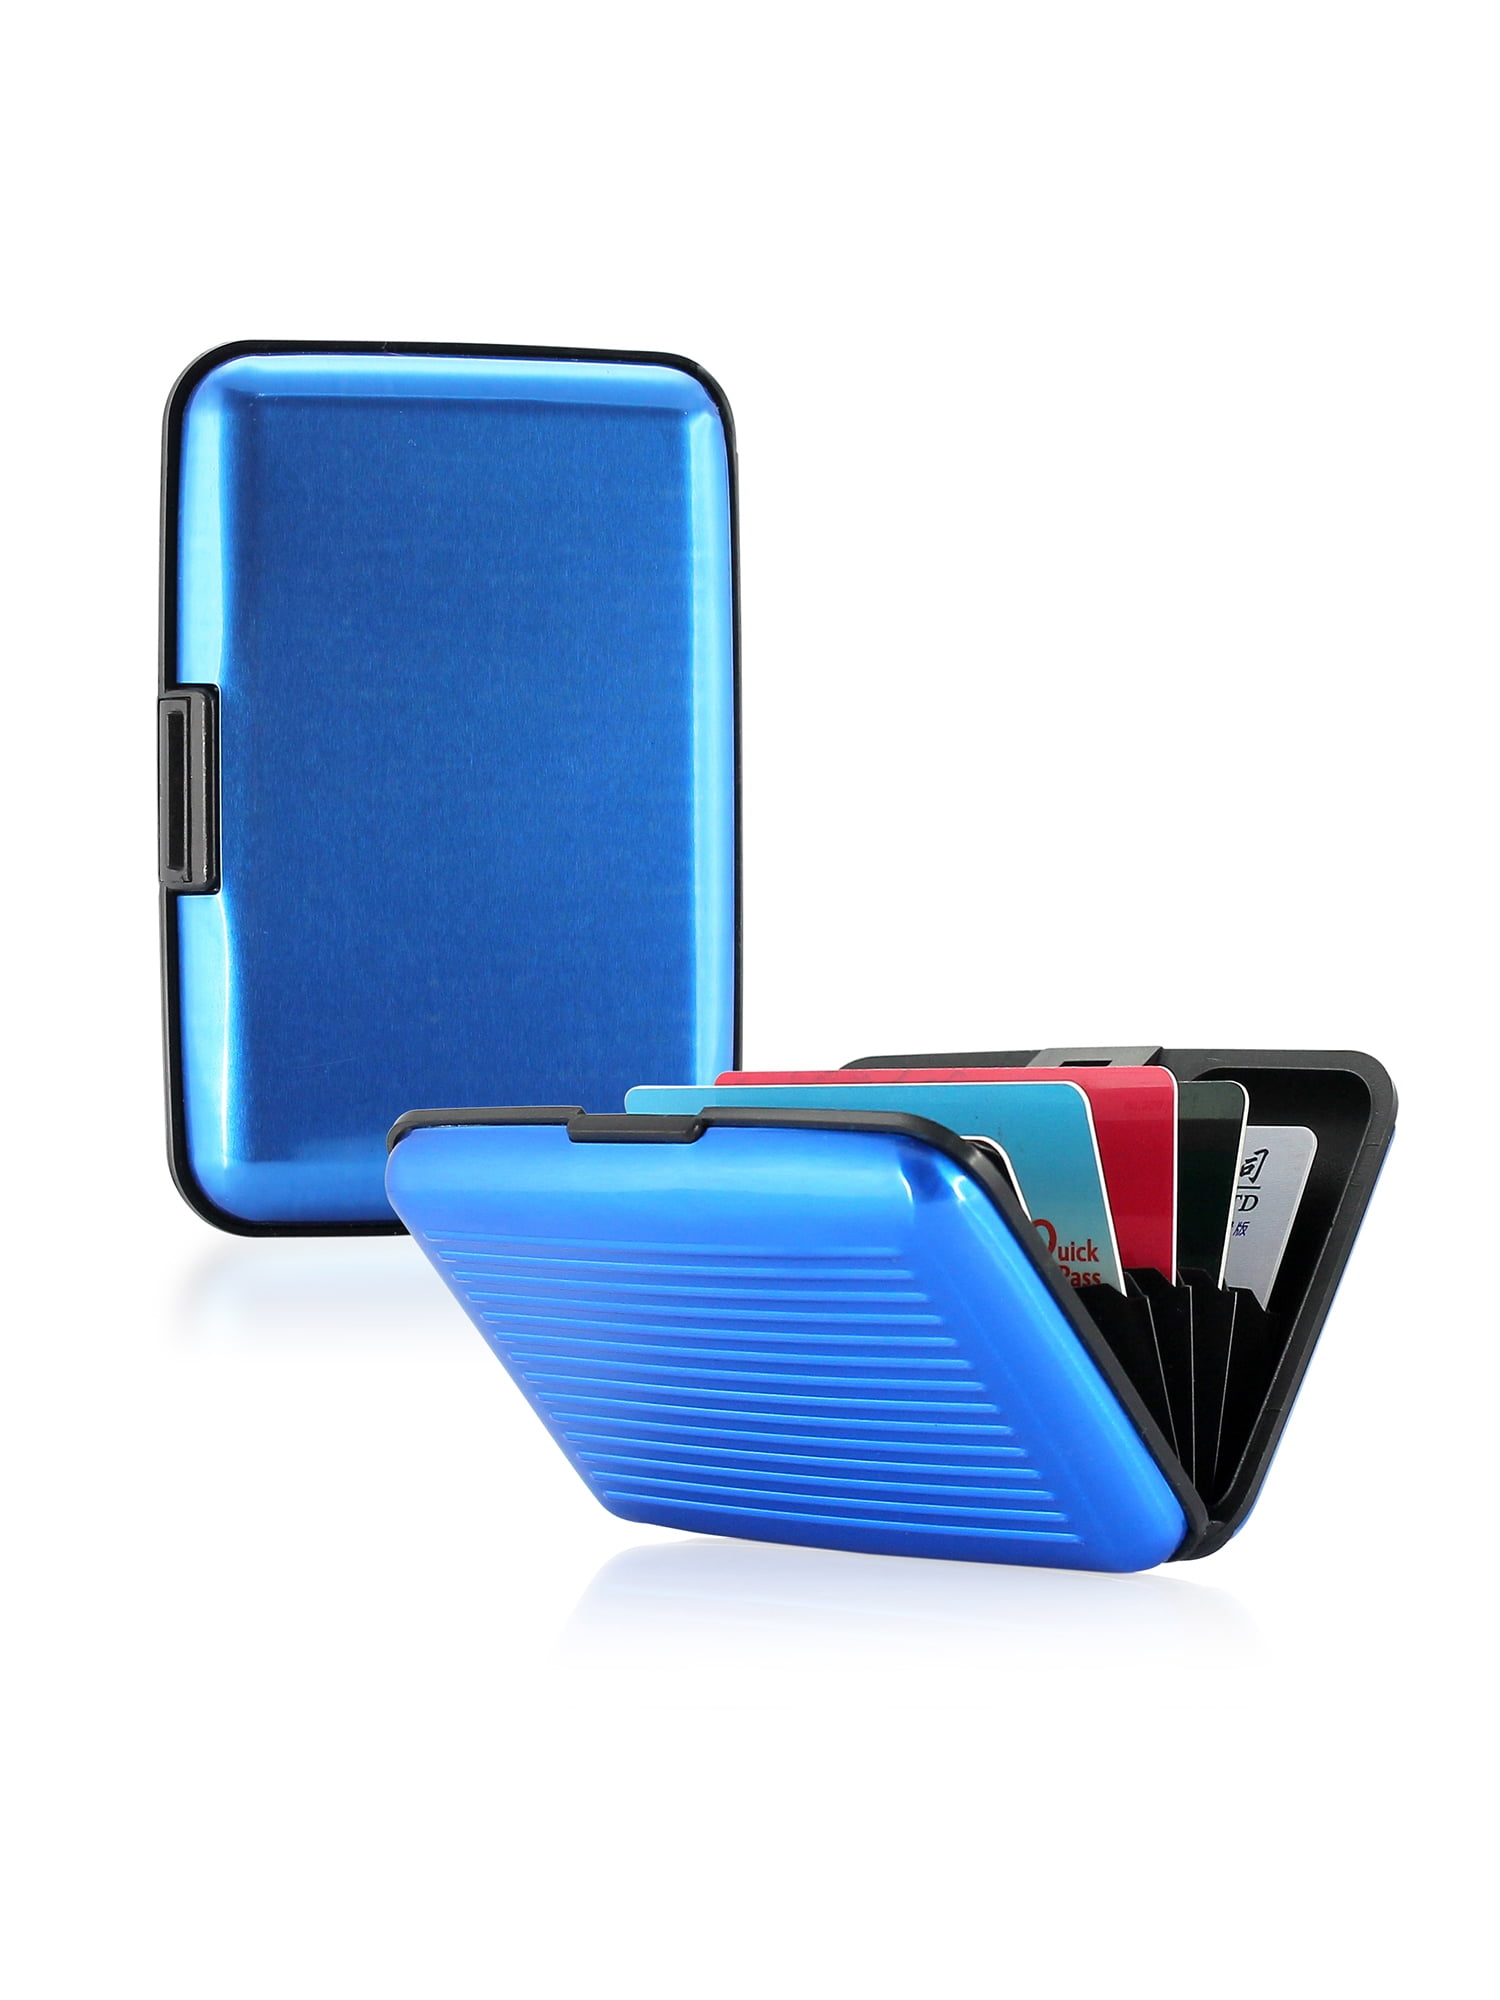 Gearonic - Aluminum Pocket Business ID Credit Cards Wallet Holder Case Metal Box - 0